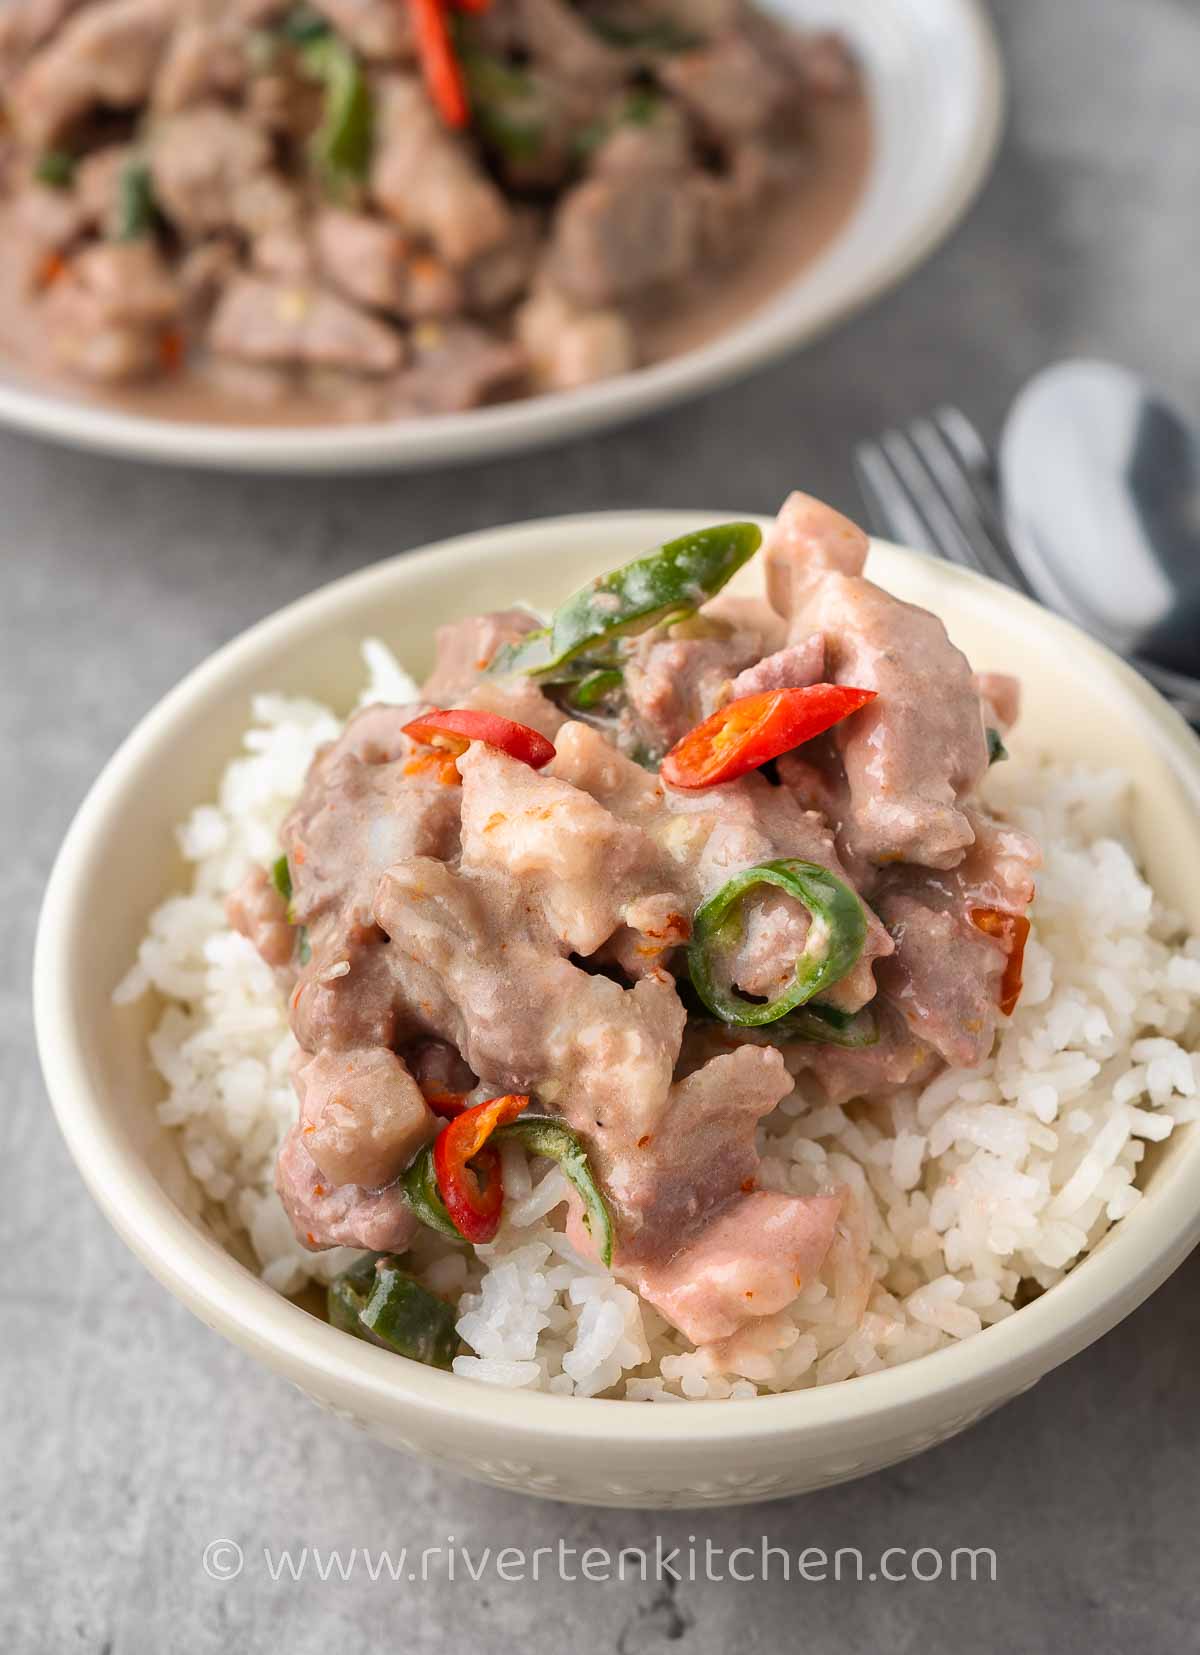 Bicol express served with white rice.